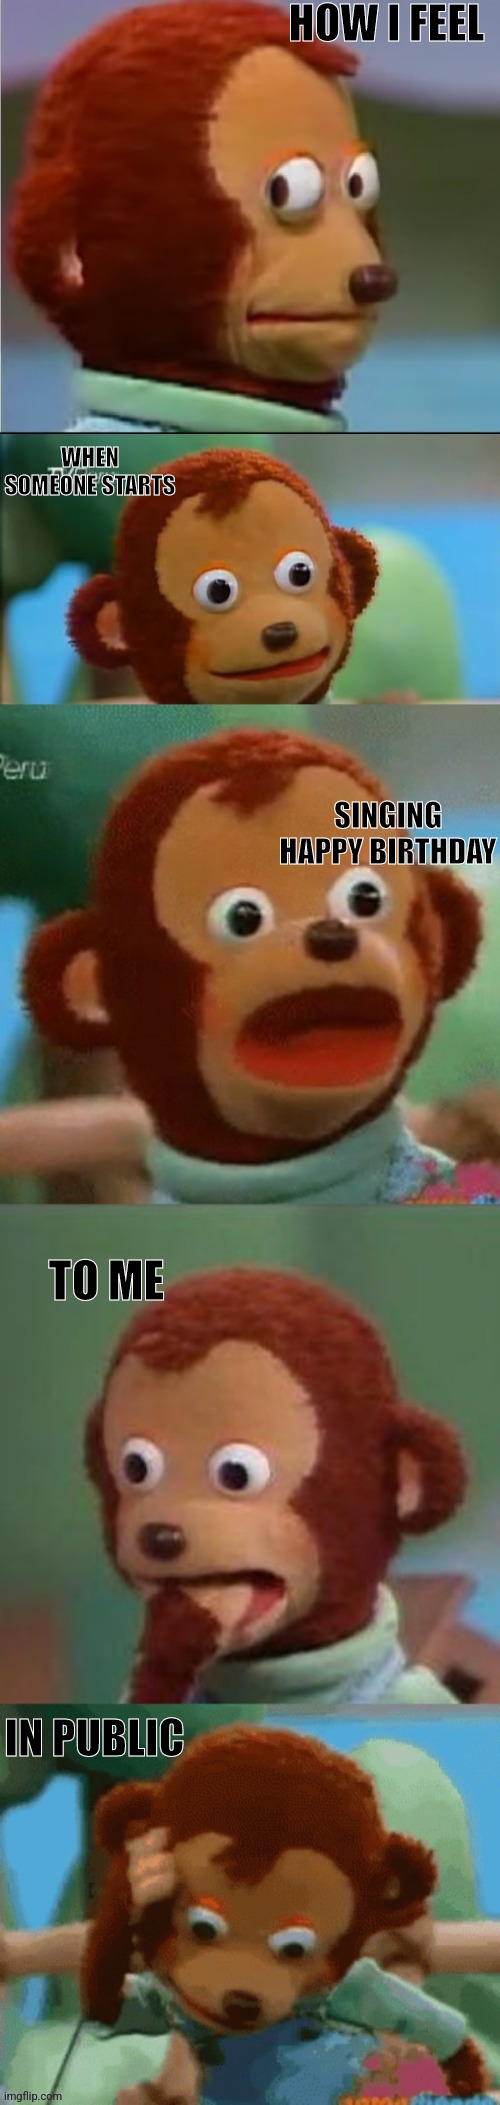 Surprised monkey puppet |  HOW I FEEL; WHEN SOMEONE STARTS; SINGING HAPPY BIRTHDAY; TO ME; IN PUBLIC | image tagged in surprised monkey puppet | made w/ Imgflip meme maker